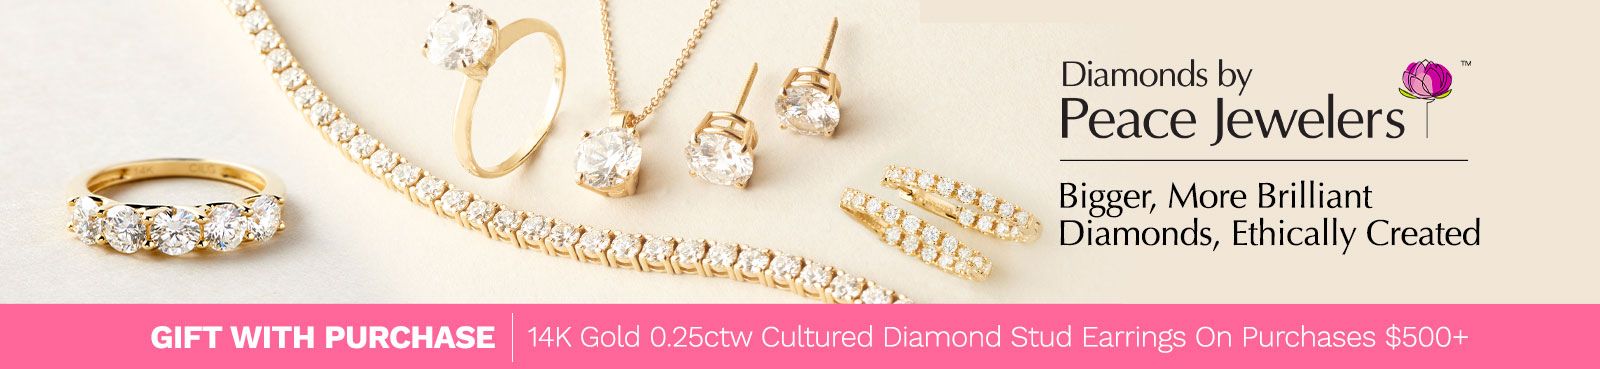 Peace Jewelers - Bigger, More Brillaint Diamonds, Ethically Created : Gift with Purchase on Orders $500+ 14K Gold 0.25ctw Cultured Diamond Stud Earrings ($249 Value)